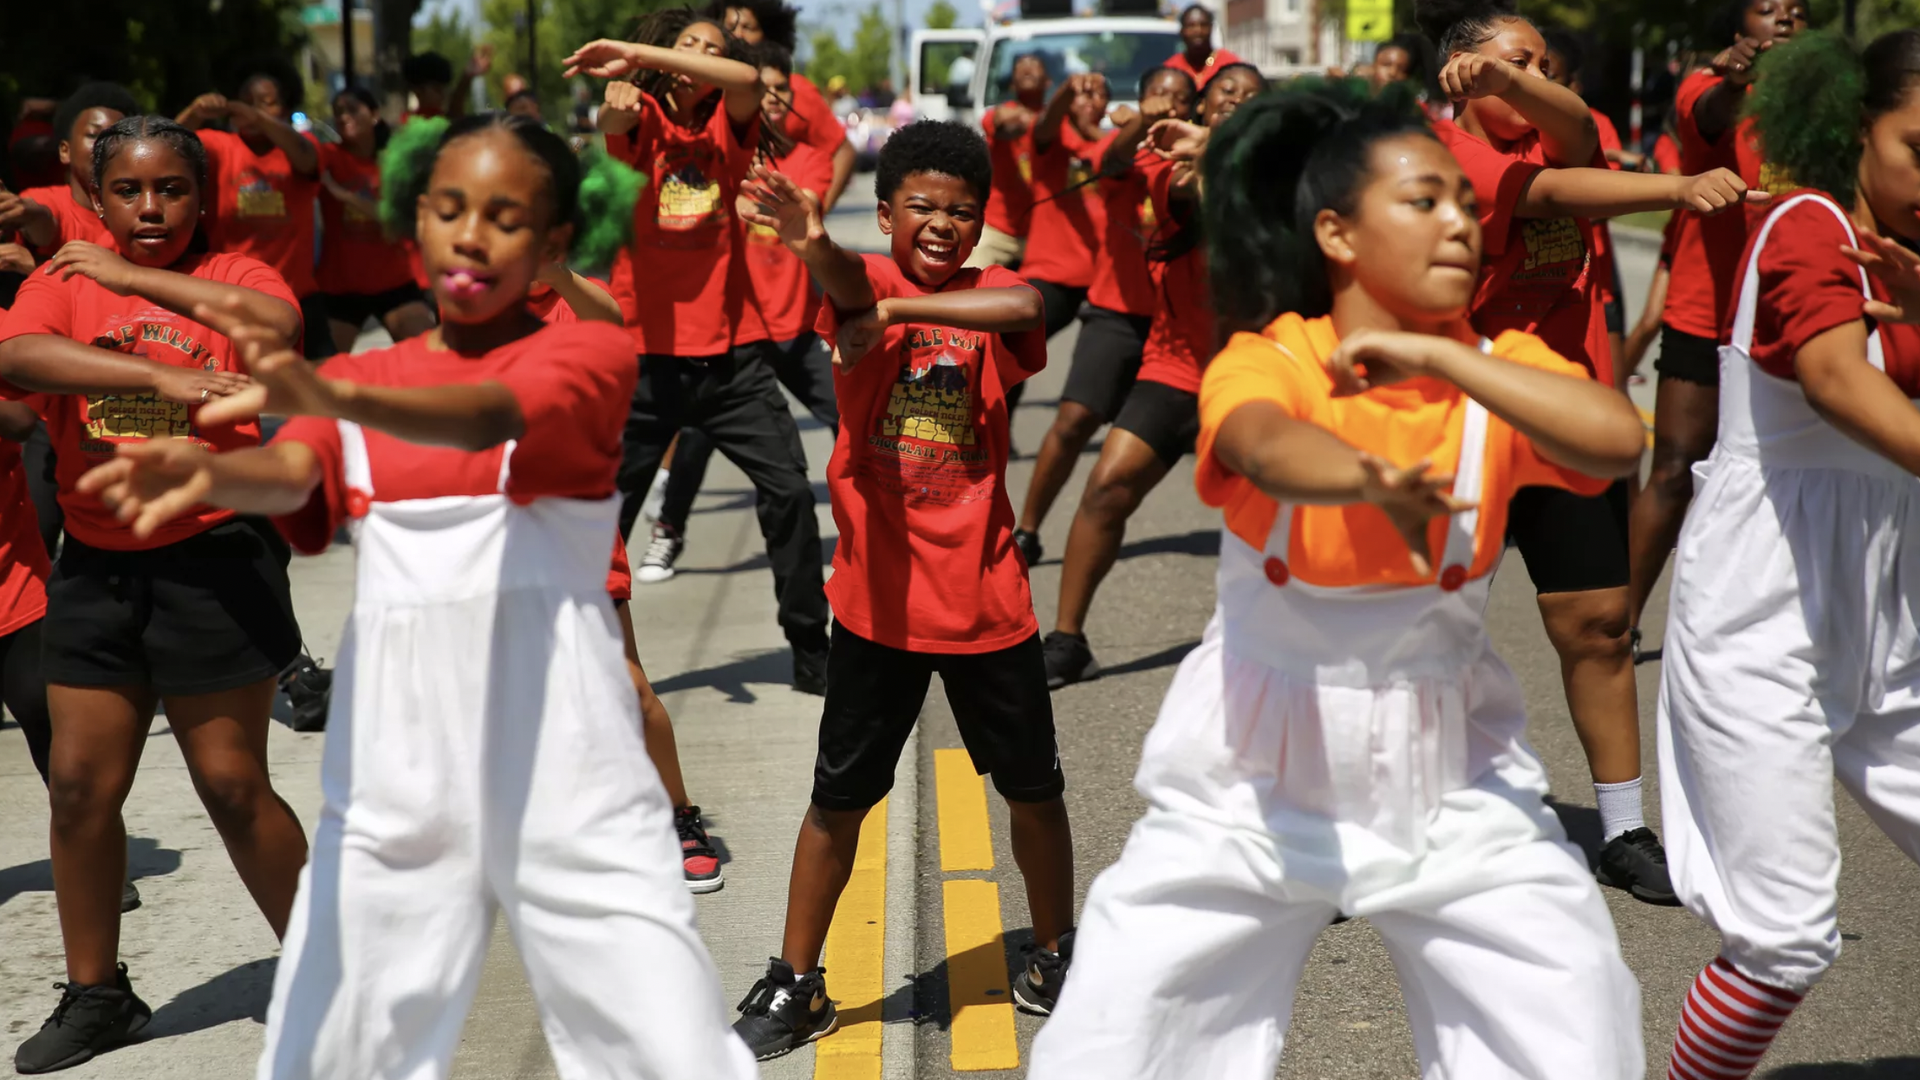 A scene from the 2019 Umoja Fest Africatown Heritage Parade